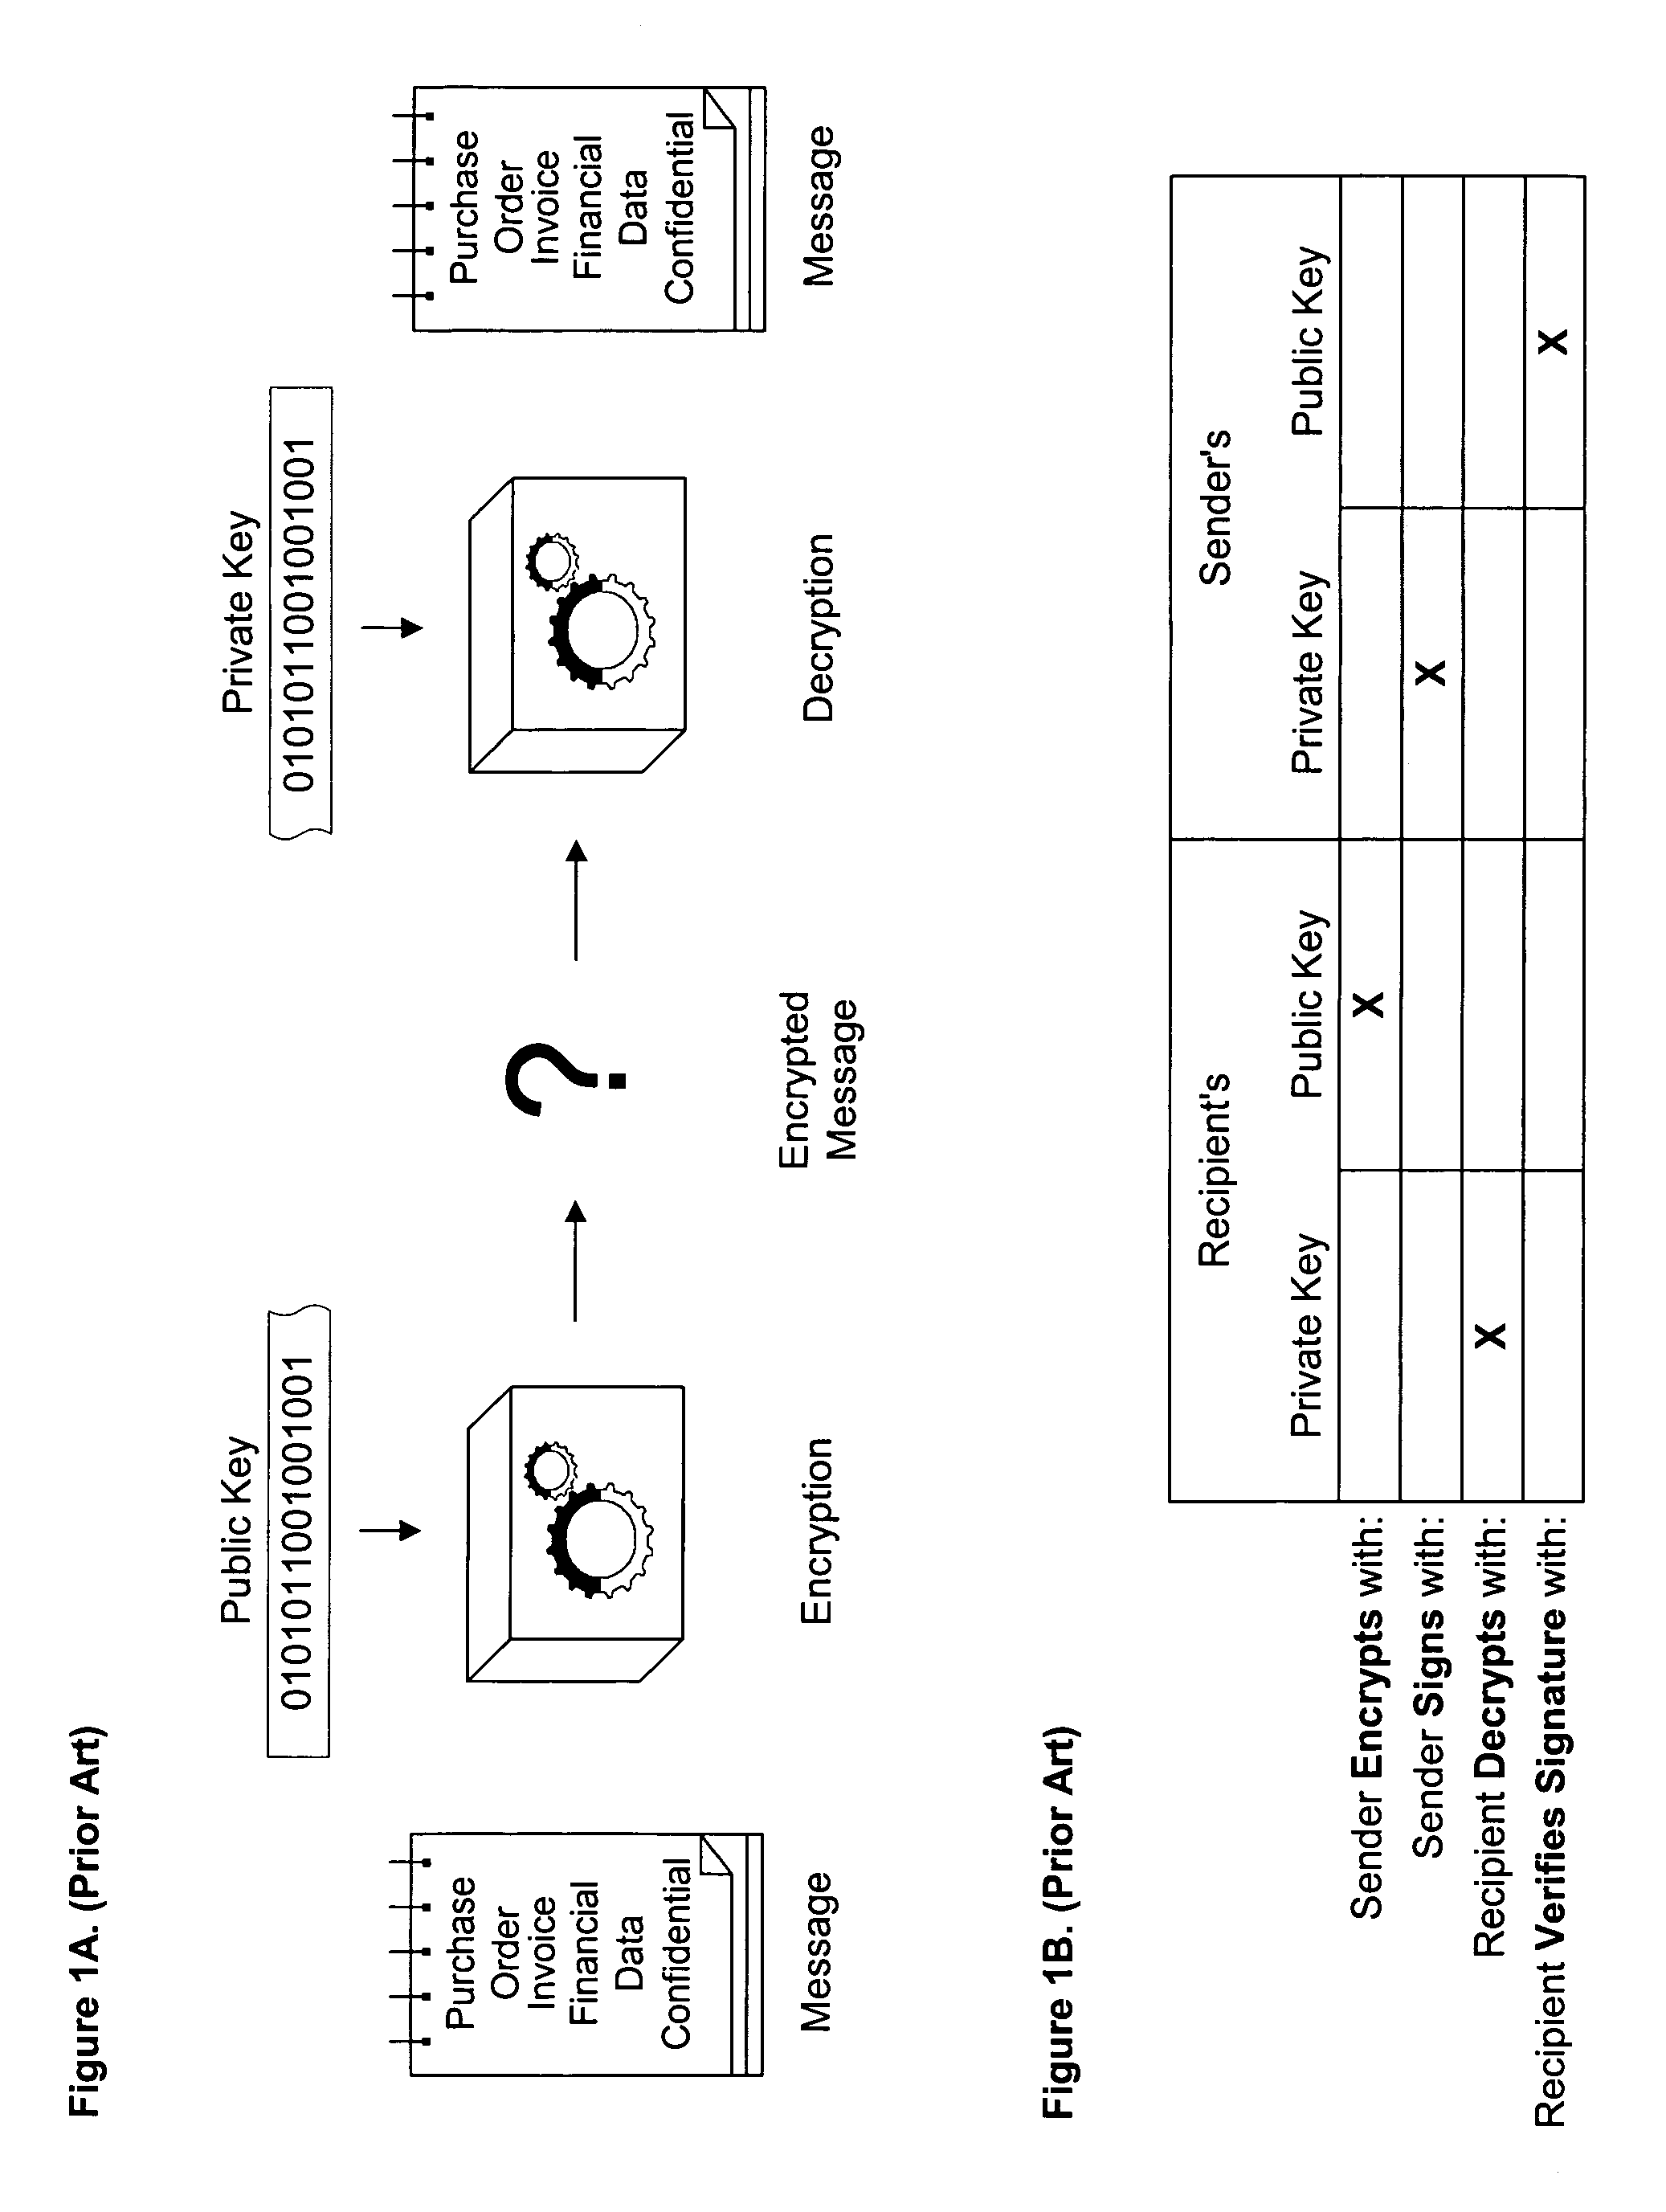 Cryptographic system with methods for user-controlled message recovery